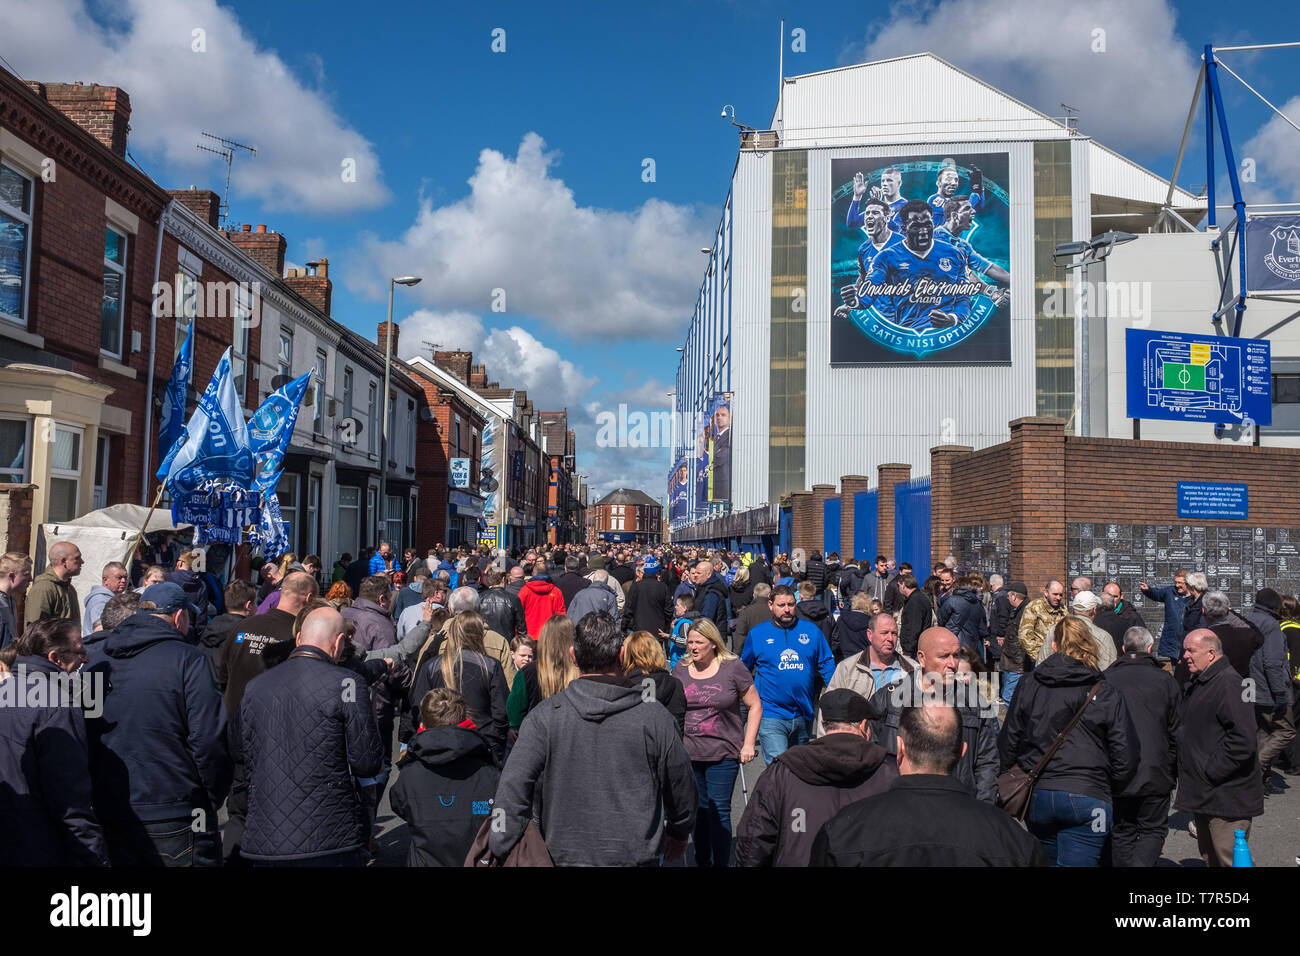 Everton, Liverpool, UK, April, 17, 2016: Crowds supporters gather at Everton Football Club for a premiership game versus Southampton, flags and scarfs  in the Everton colours can be seen, against a bright blue sky Stock Photo